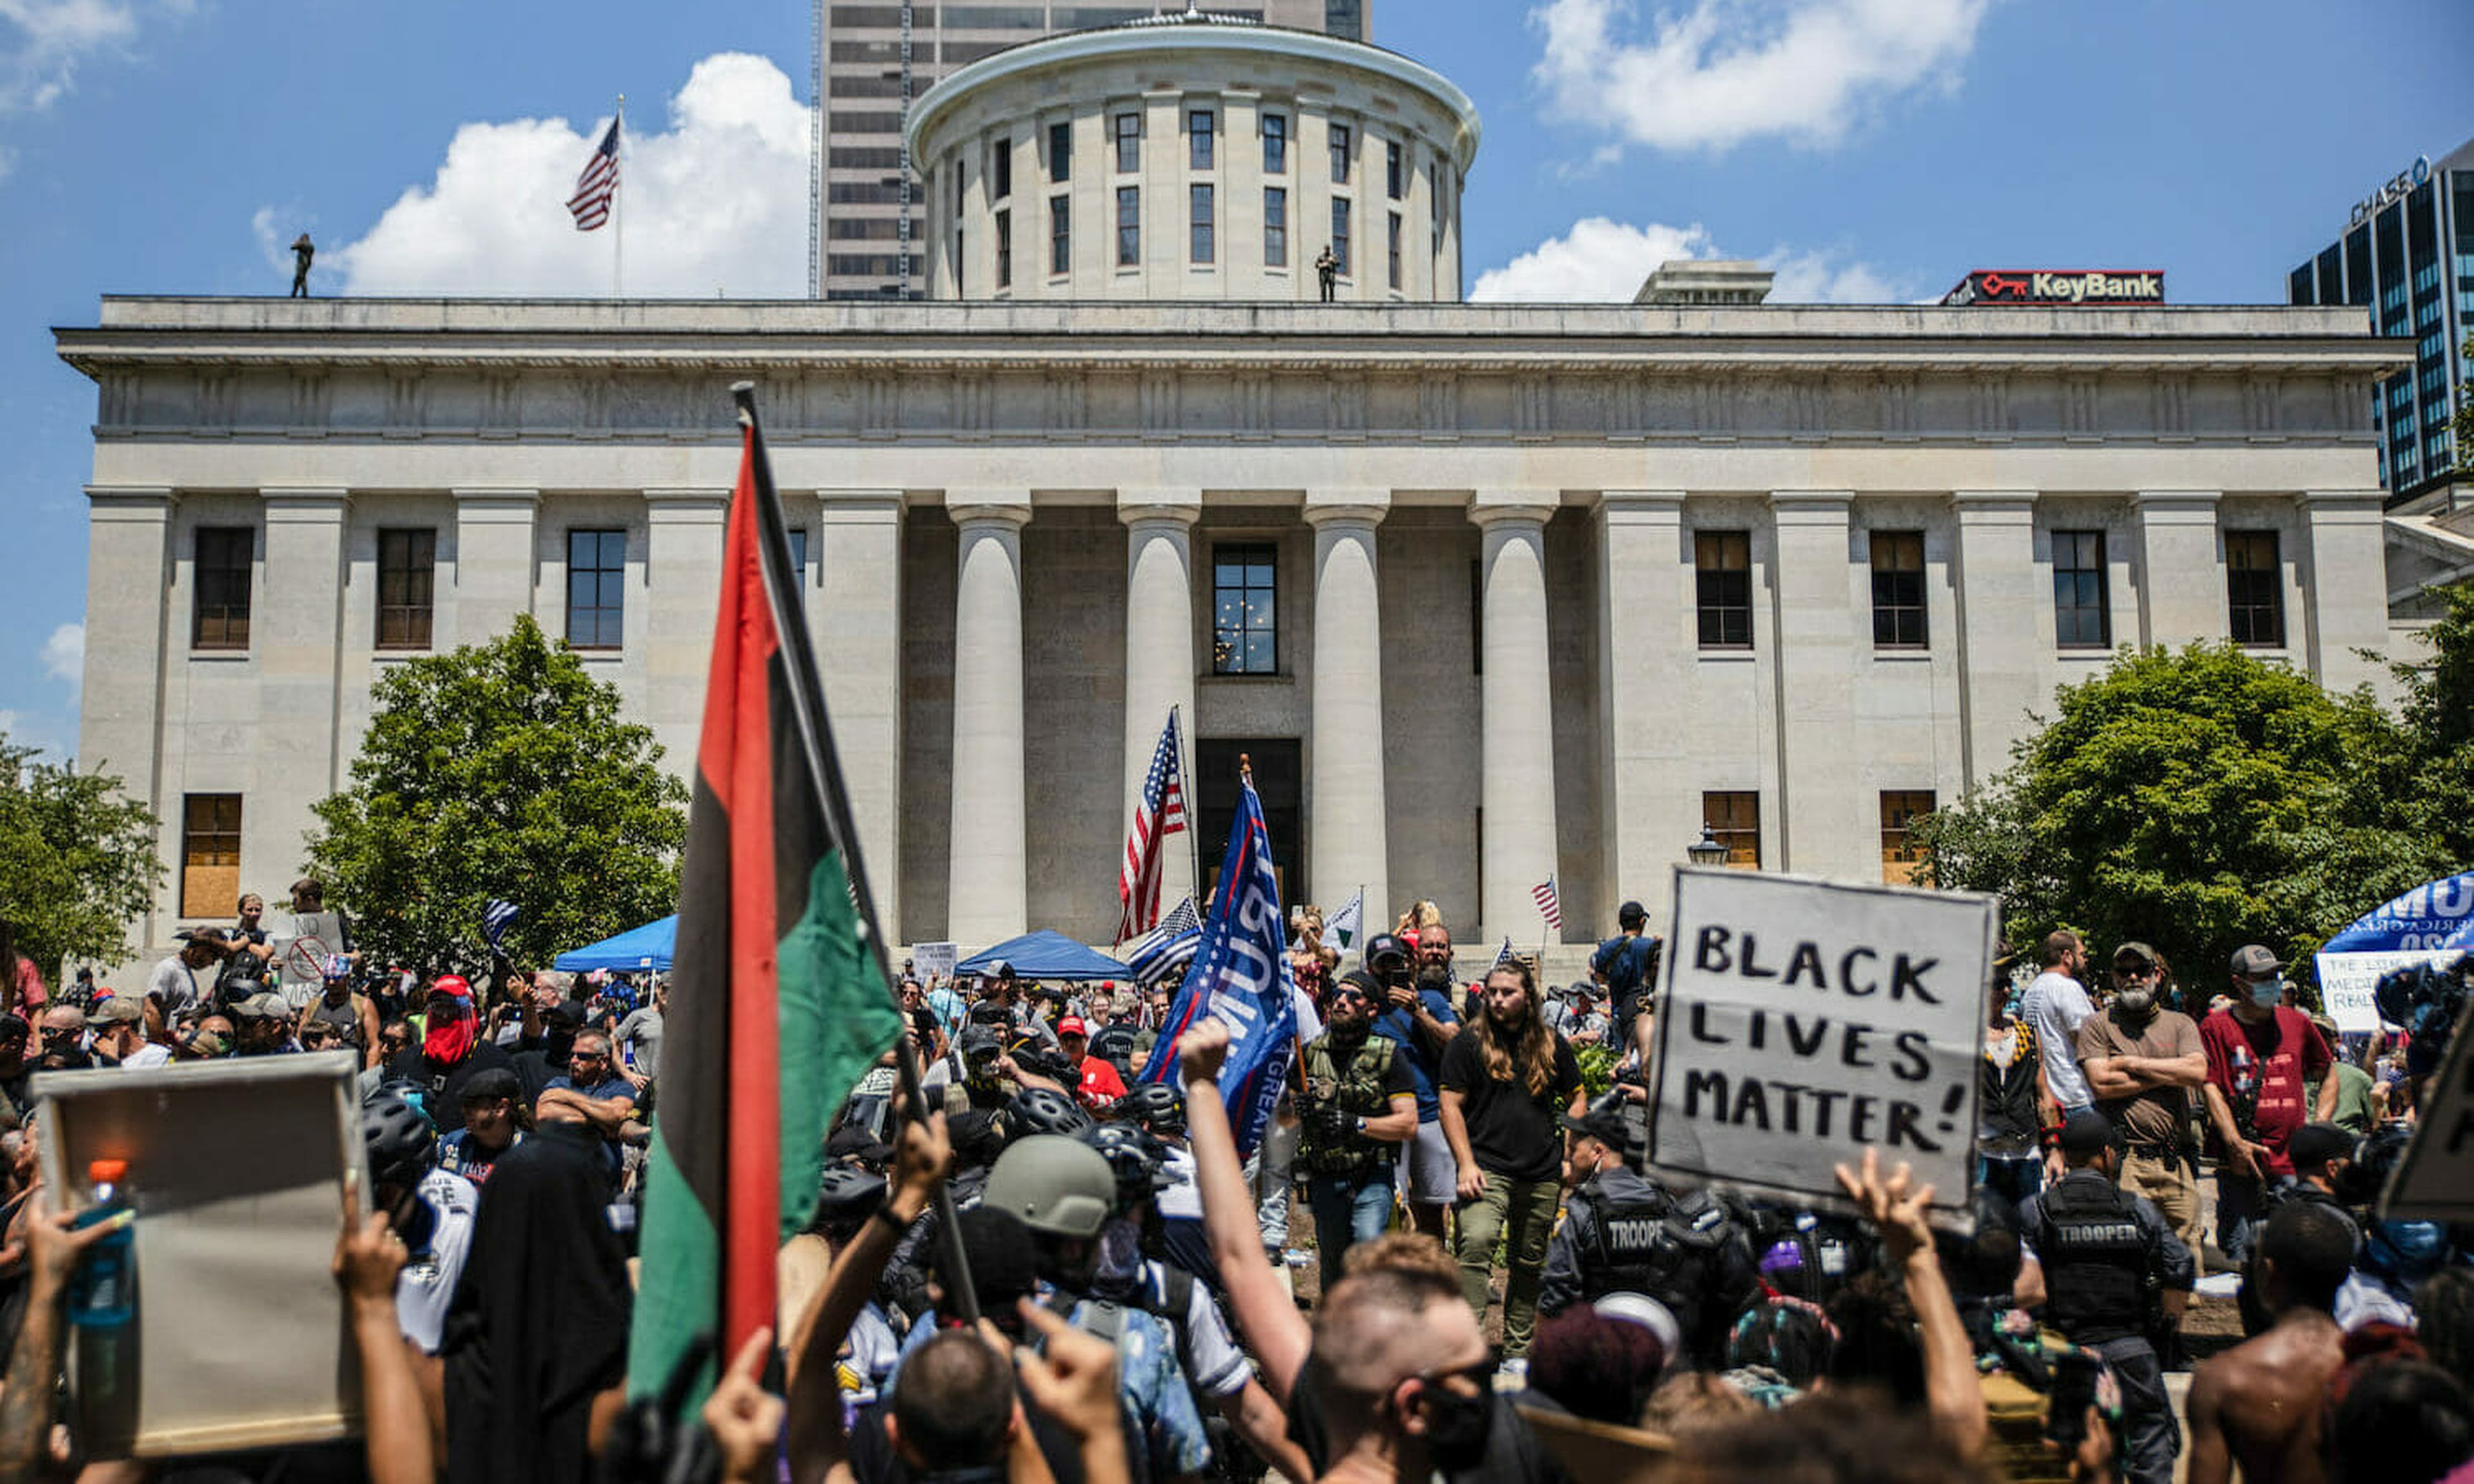 COLUMBUS, UNITED STATES &#8211; 2020/07/18: Anti-Mask protesters collide with Black Lives Matter counter-protesters during an &#8216;Anti-Mask&#8217; rally, Black Lives Matter protest at Ohio Statehouse.
Over 200 people gathered at the Ohio State House to protest against the face mask mandate that multiple counties are under in the state. (Photo by...